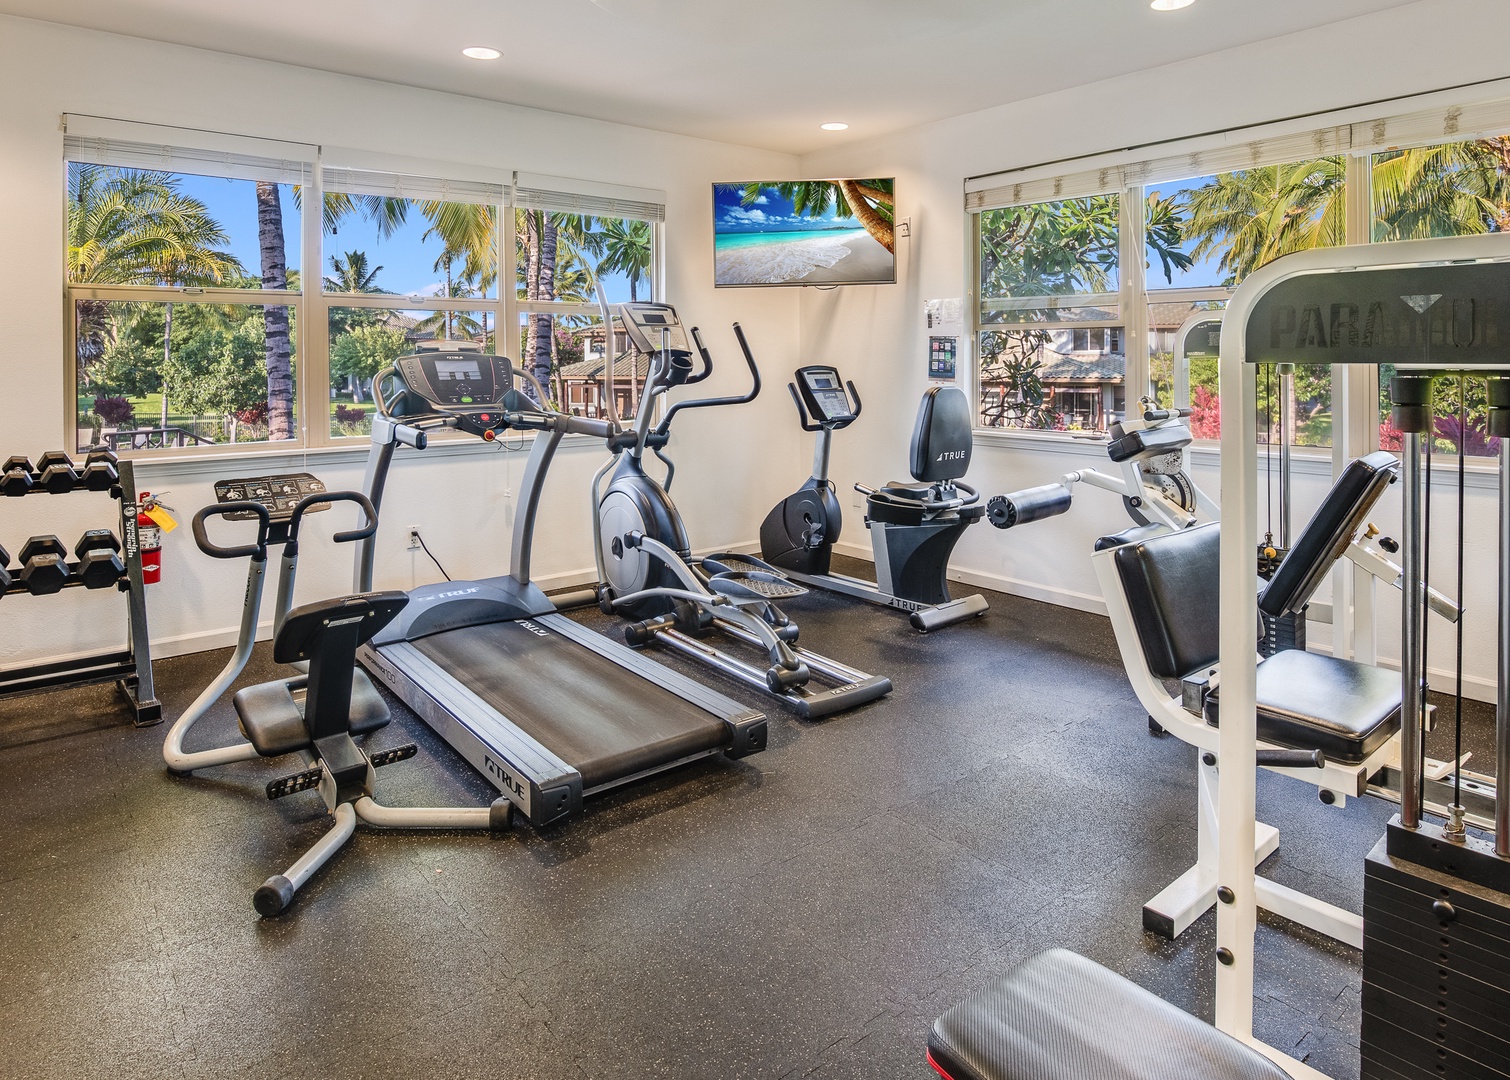 Kamuela Vacation Rentals, Mauna Lani Fairways #204 - A Gym With a View of The Fairways Pool